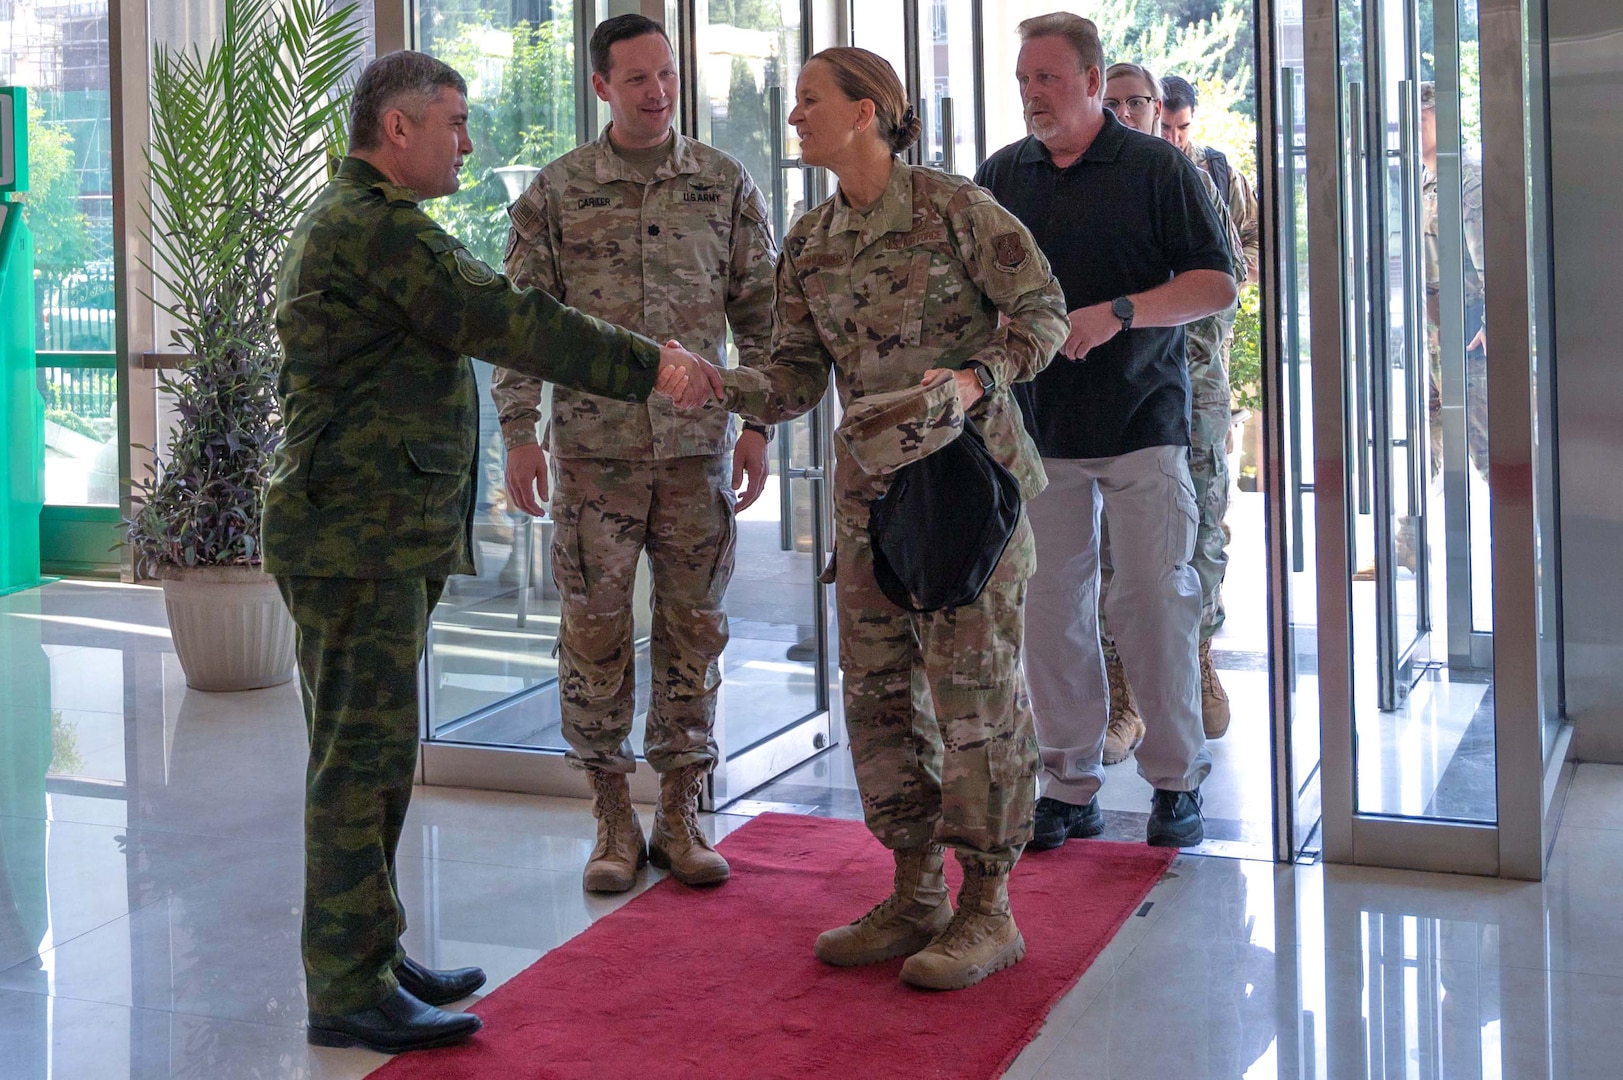 Maj. Gen. Kerry Muehlenbeck, The Adjutant General-Arizona, is greeted by Tajikistan officials as she tours the Exercise REGIONAL COOPERATION 22 training site to observe the exercise and visit Arizona Army and Air National Guard participants. (U.S. Air National Guard photo by Maj. Angela Walz)